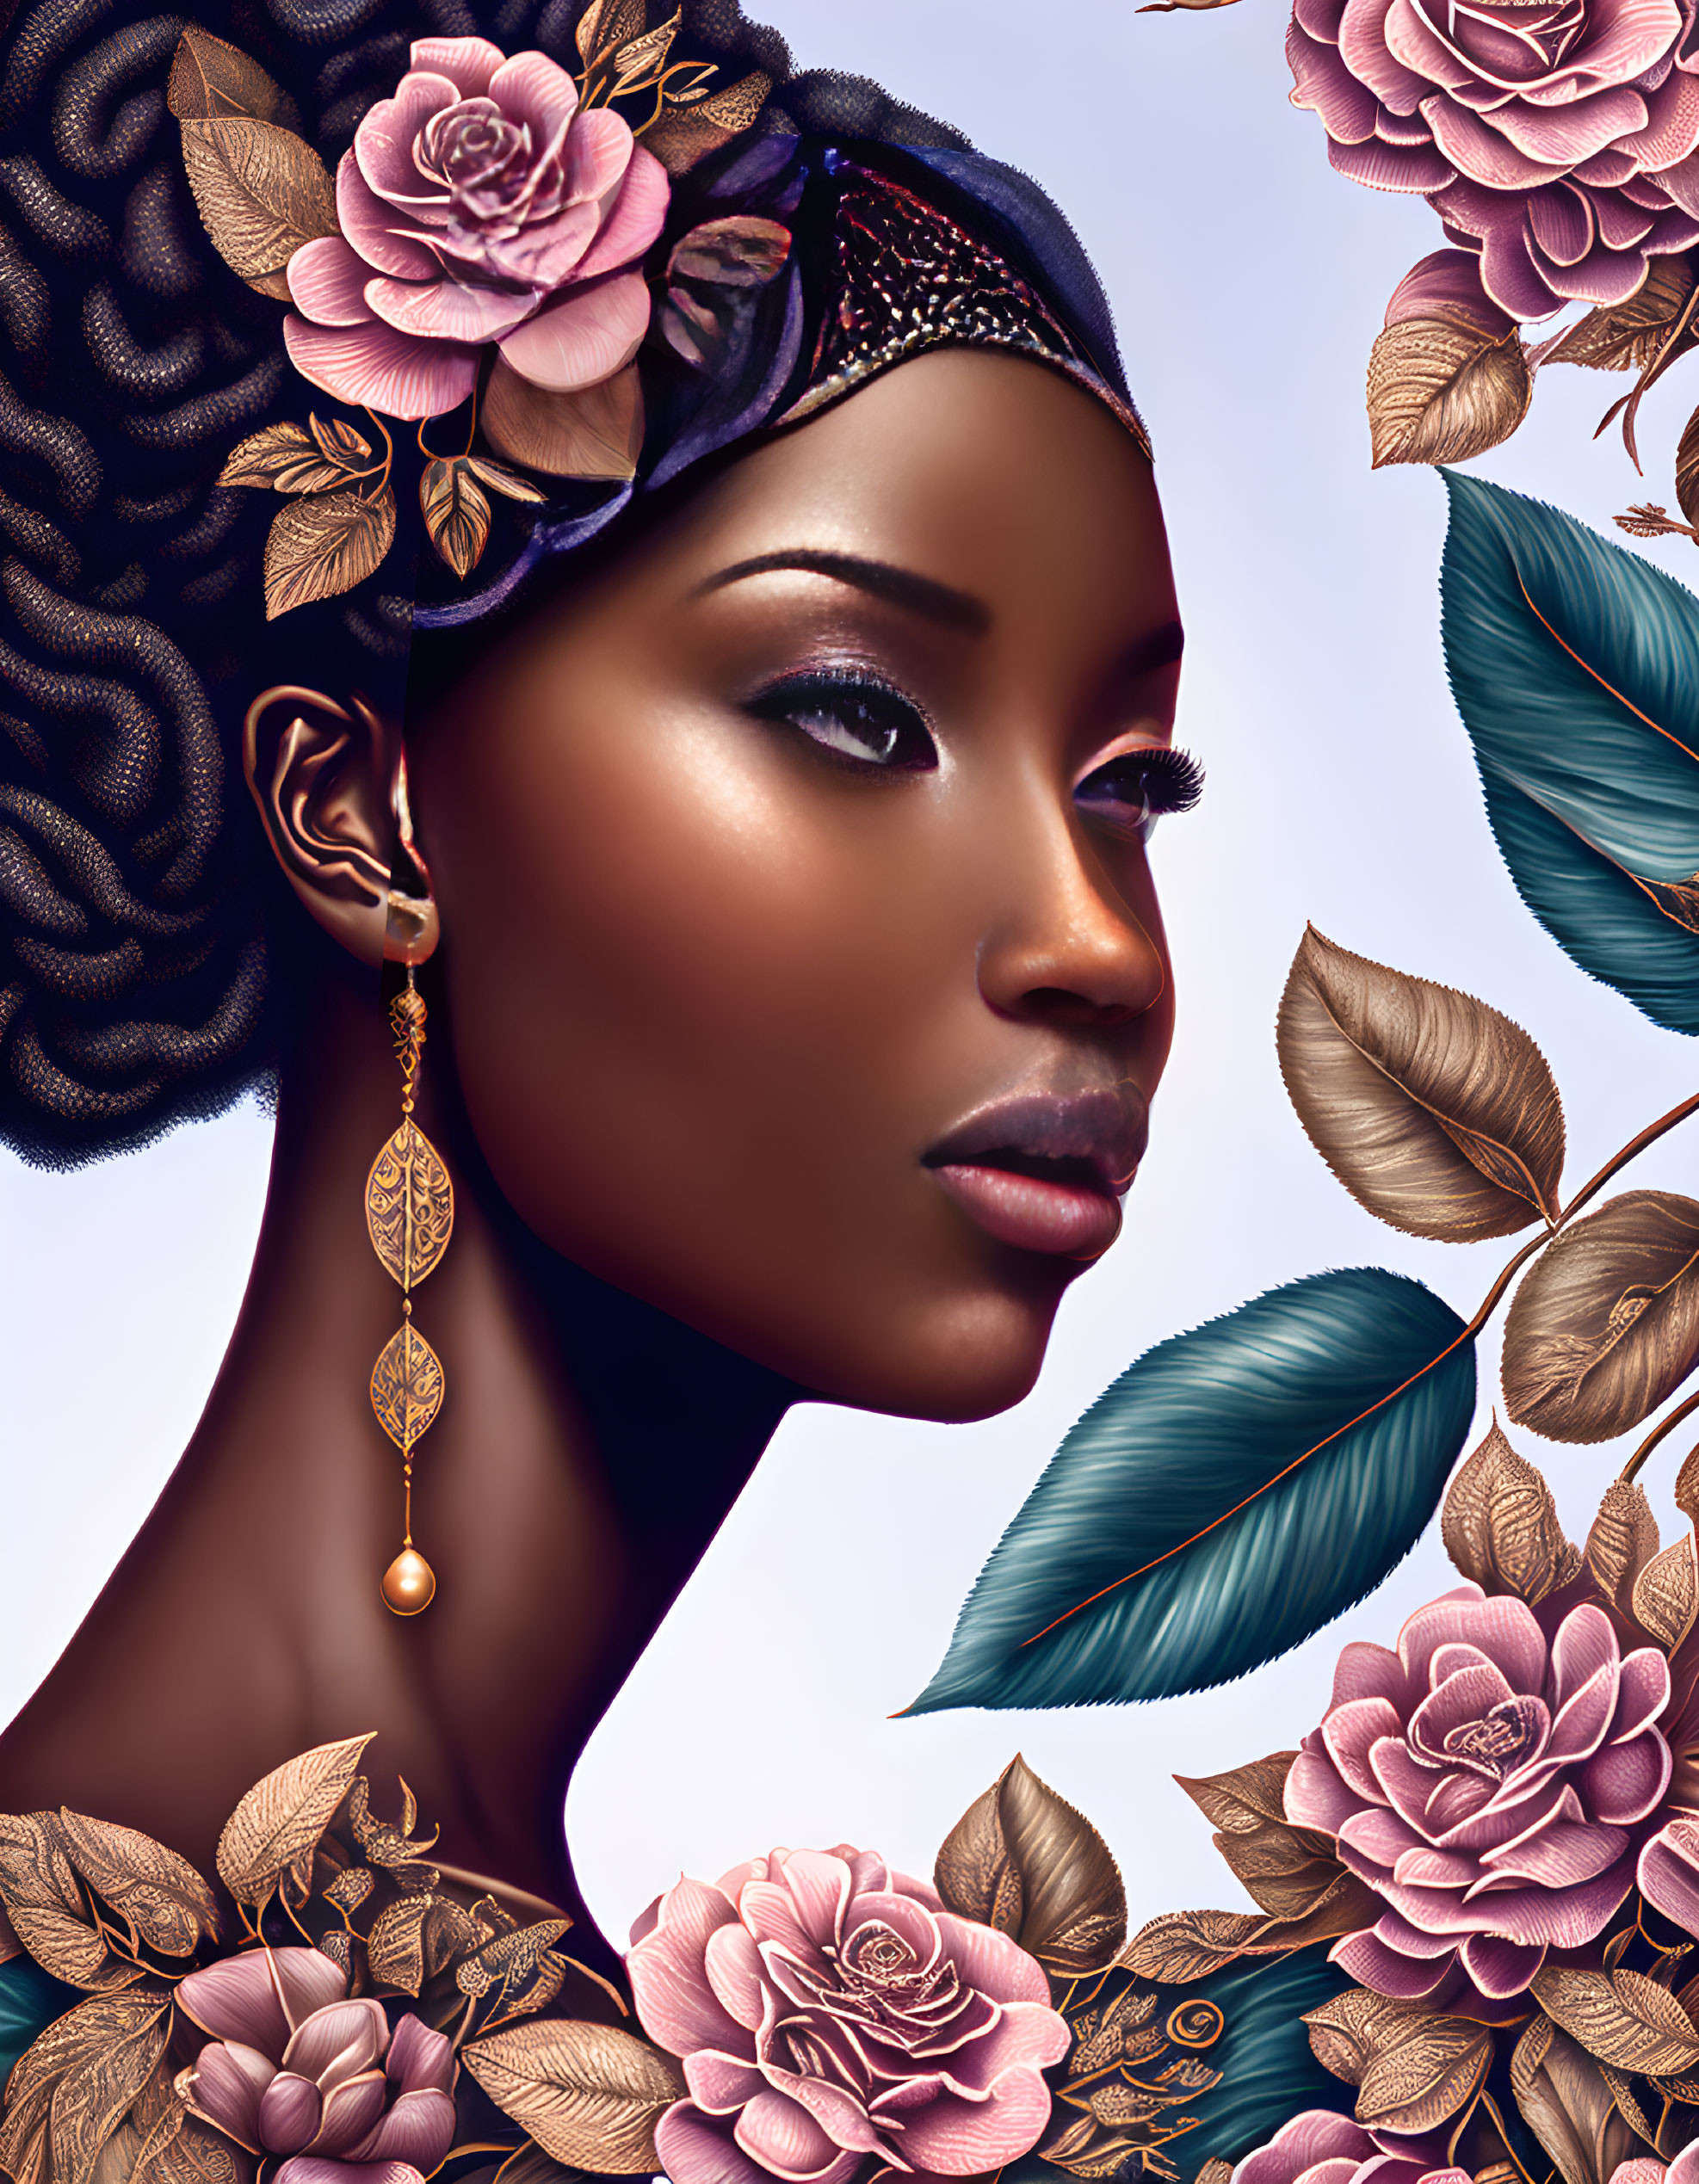 Illustrated portrait of woman with dark skin, headwrap, roses, gold earring, surrounded by